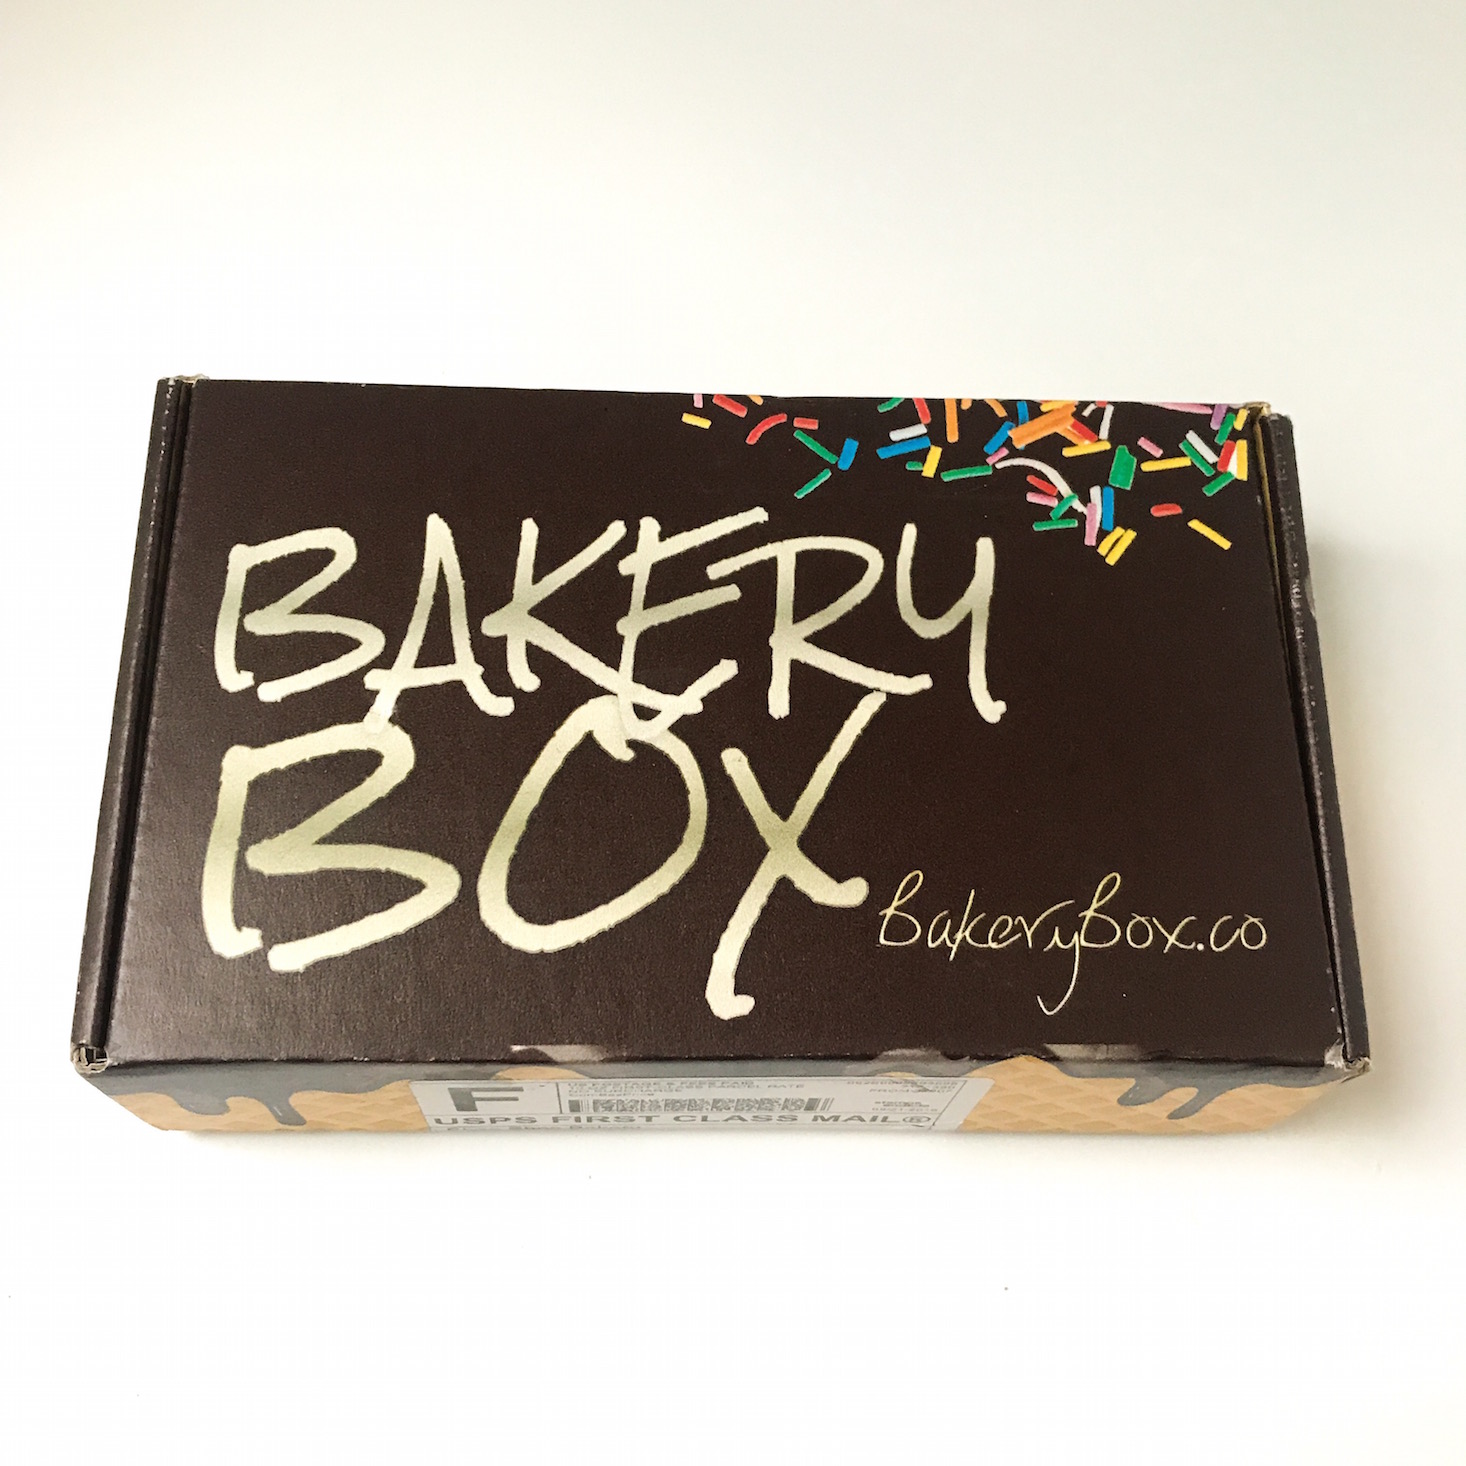 The Bakery Box by Shea Shea Bakery Review – August 2018